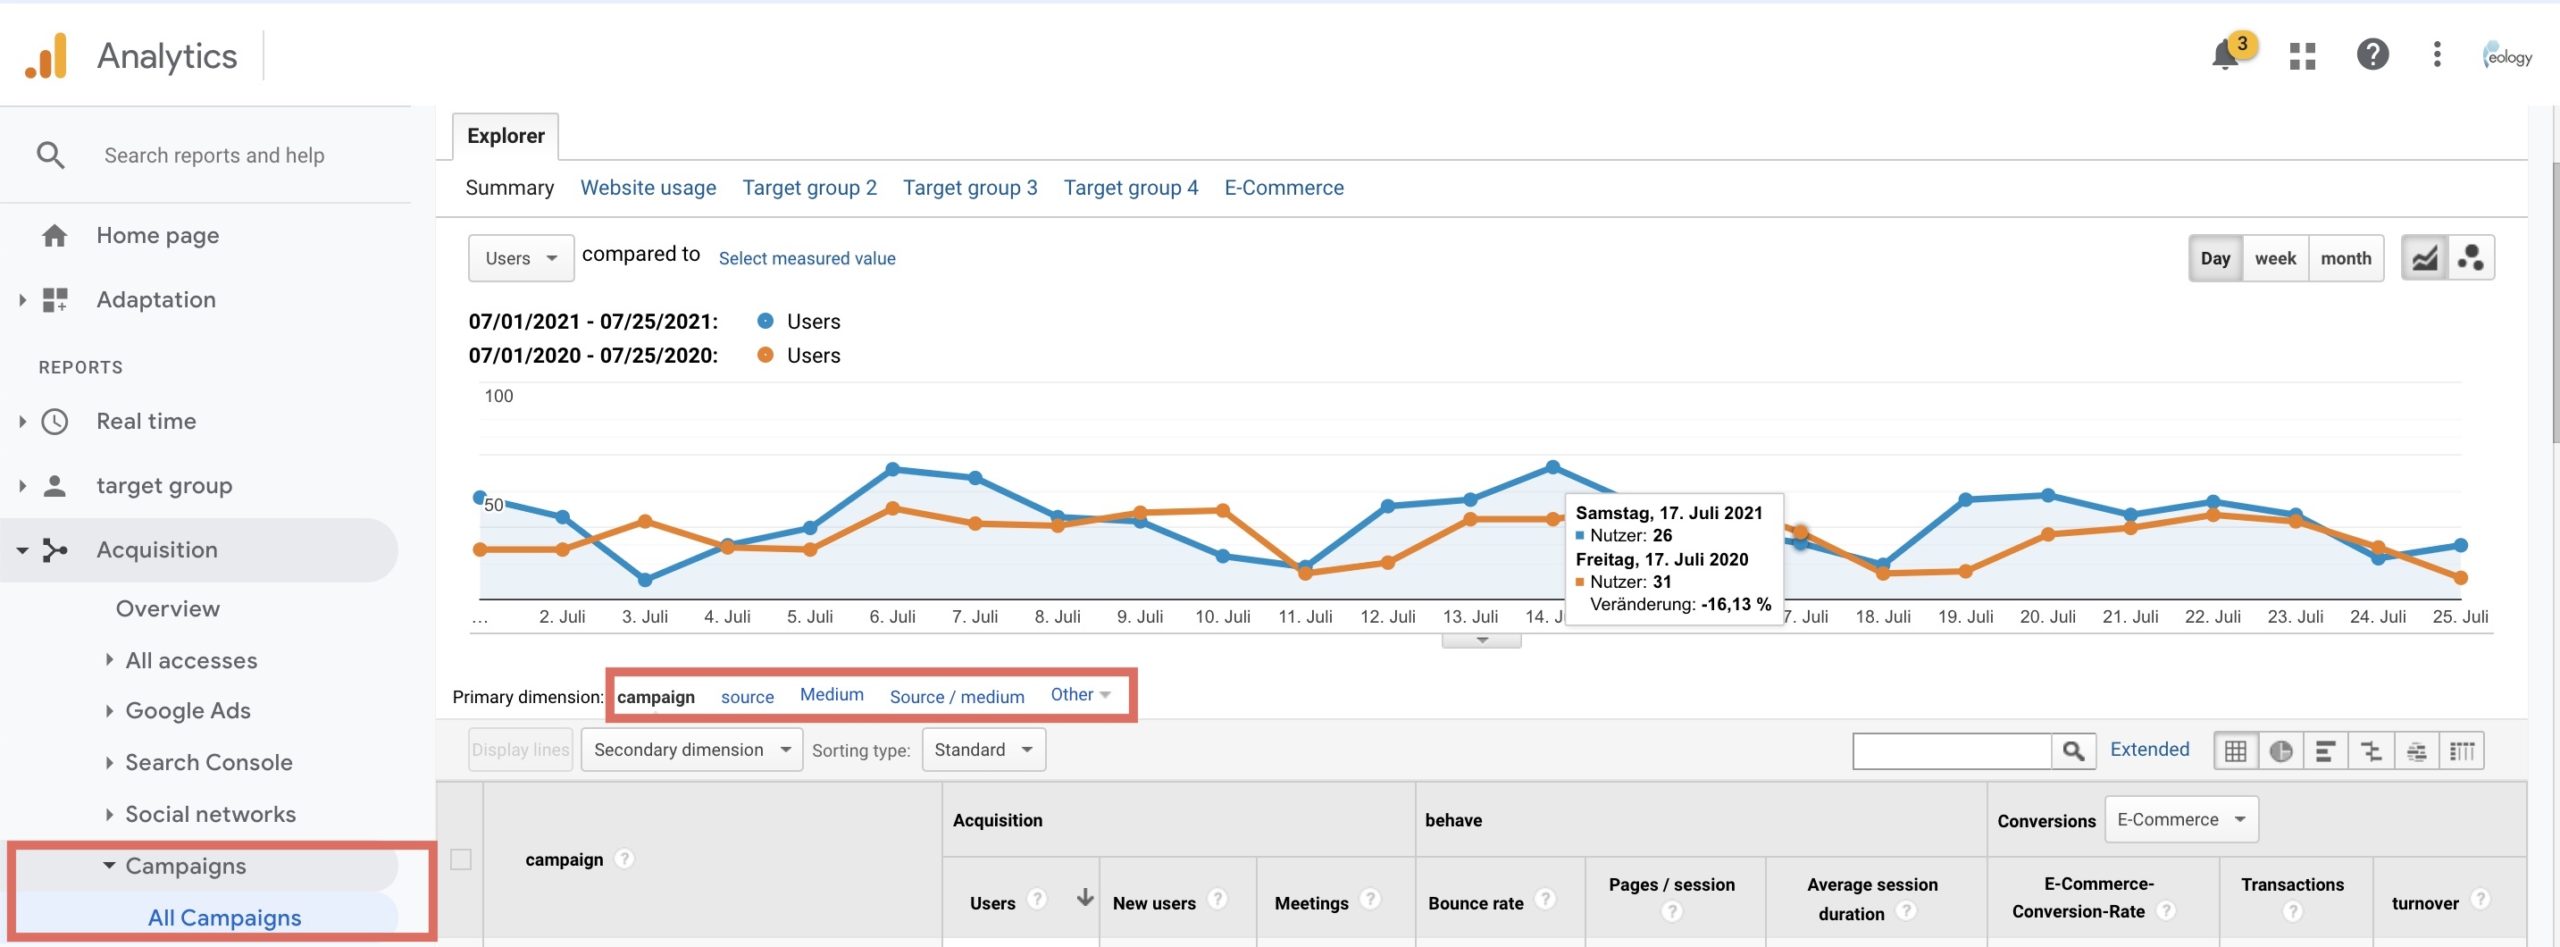 The screenshot shows a section of Google Analytics under which item the evaluation of the UTM parameters can be found.